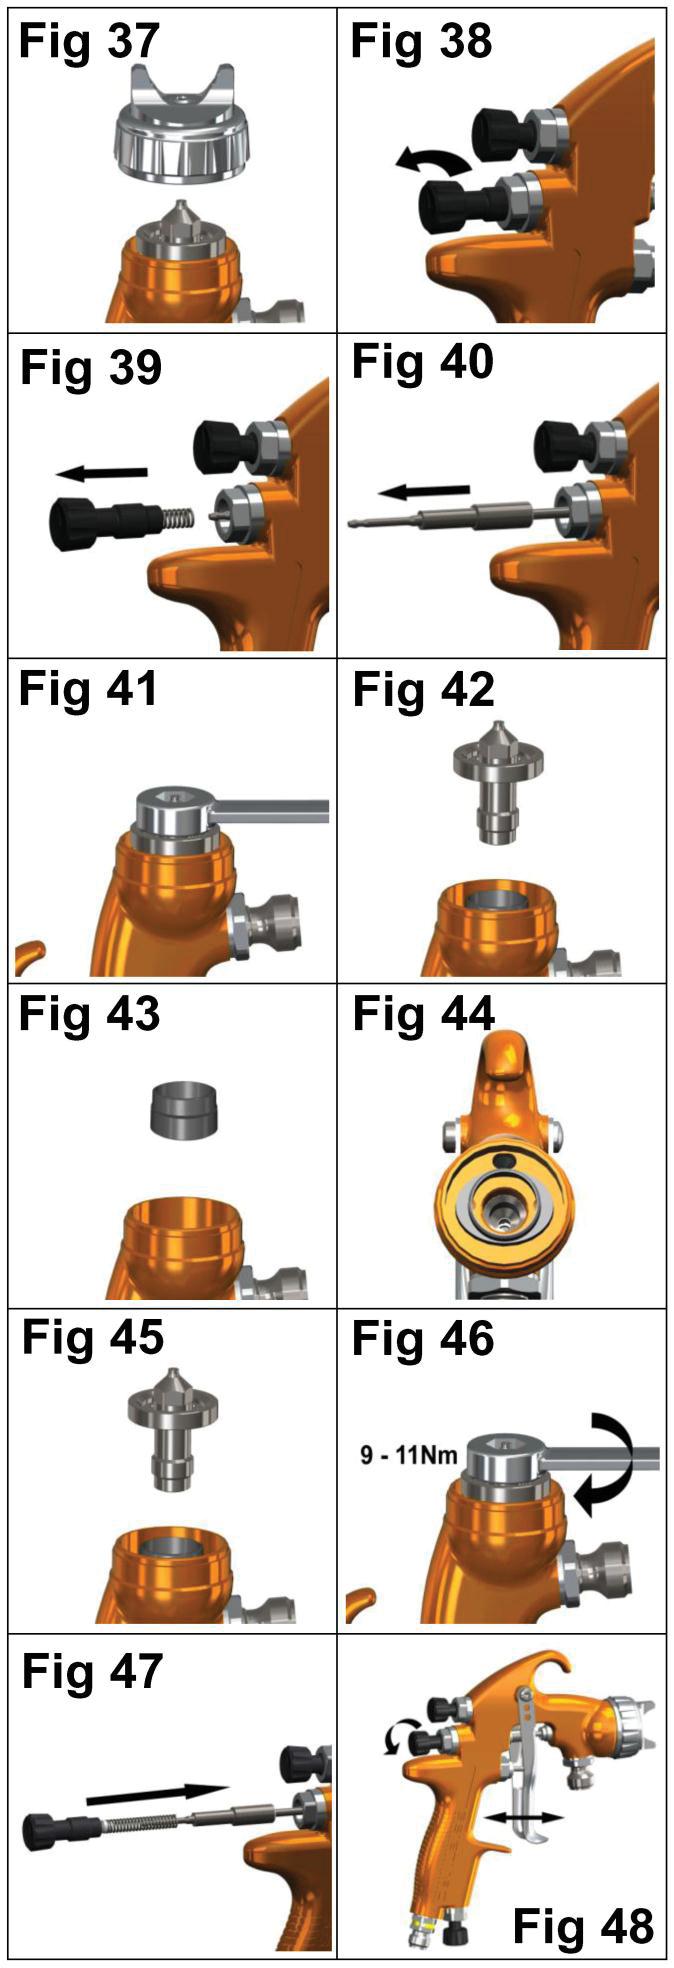 Parts Replacement/ Maintenance SEPARATOR SEAL REPLACEMENT 1. Remove air cap and retaining ring. (See fig 37) 2. Remove fluid adjusting knob, spring, and spring pad. (See figs 38 & 39) 3.